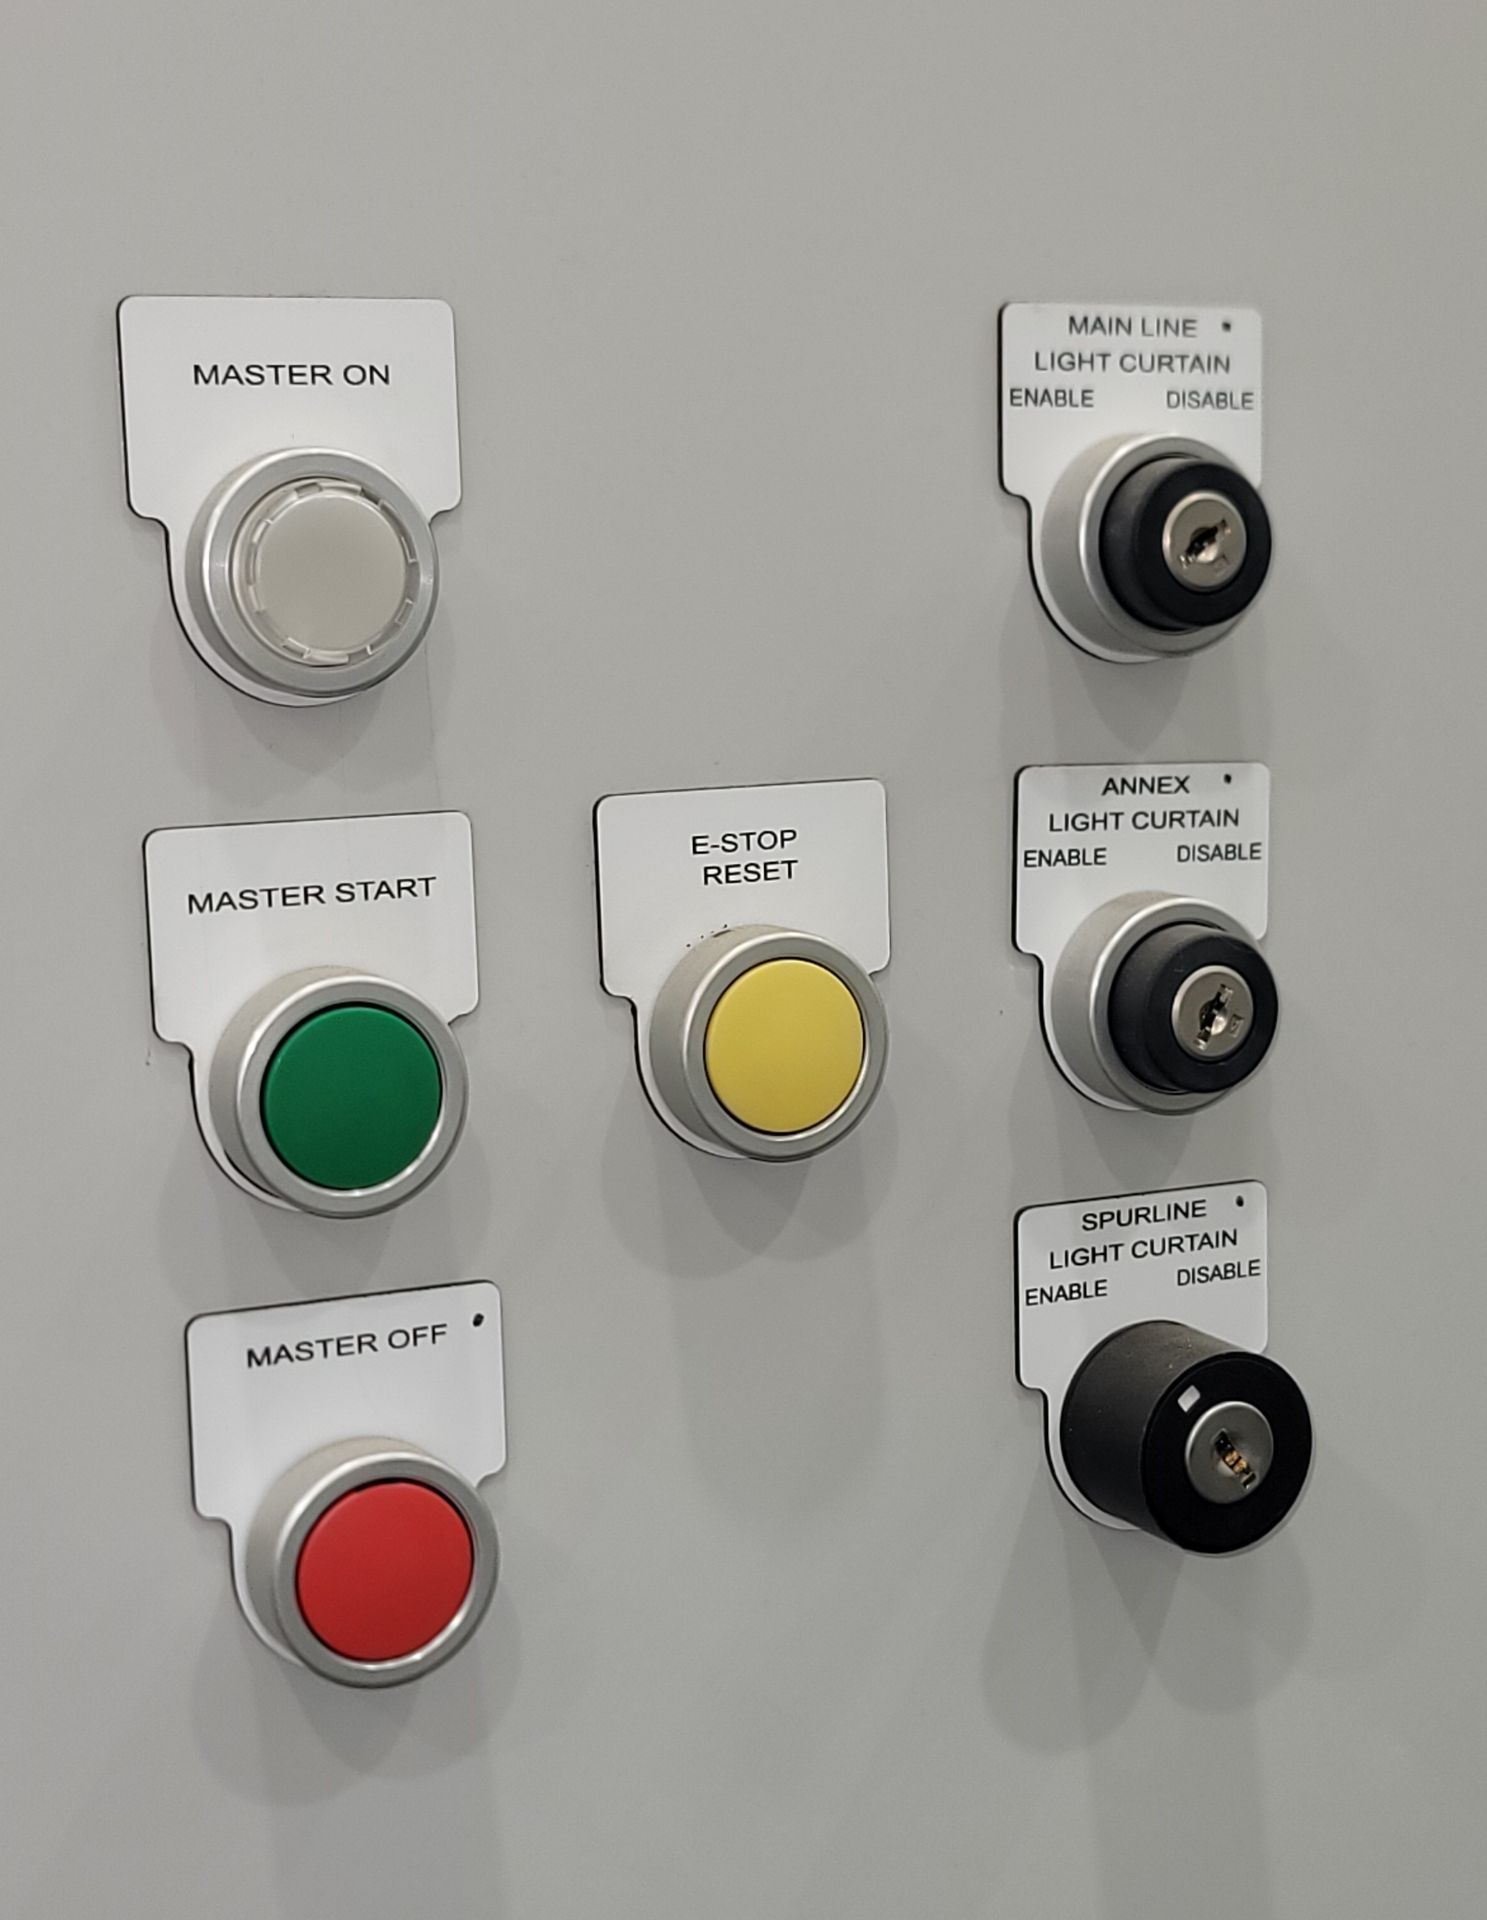 EAGLE TECHNOLOGIES INDUSTRIAL CONTROL PANEL FOR INDUSTRIAL MACHINERY - Image 3 of 4